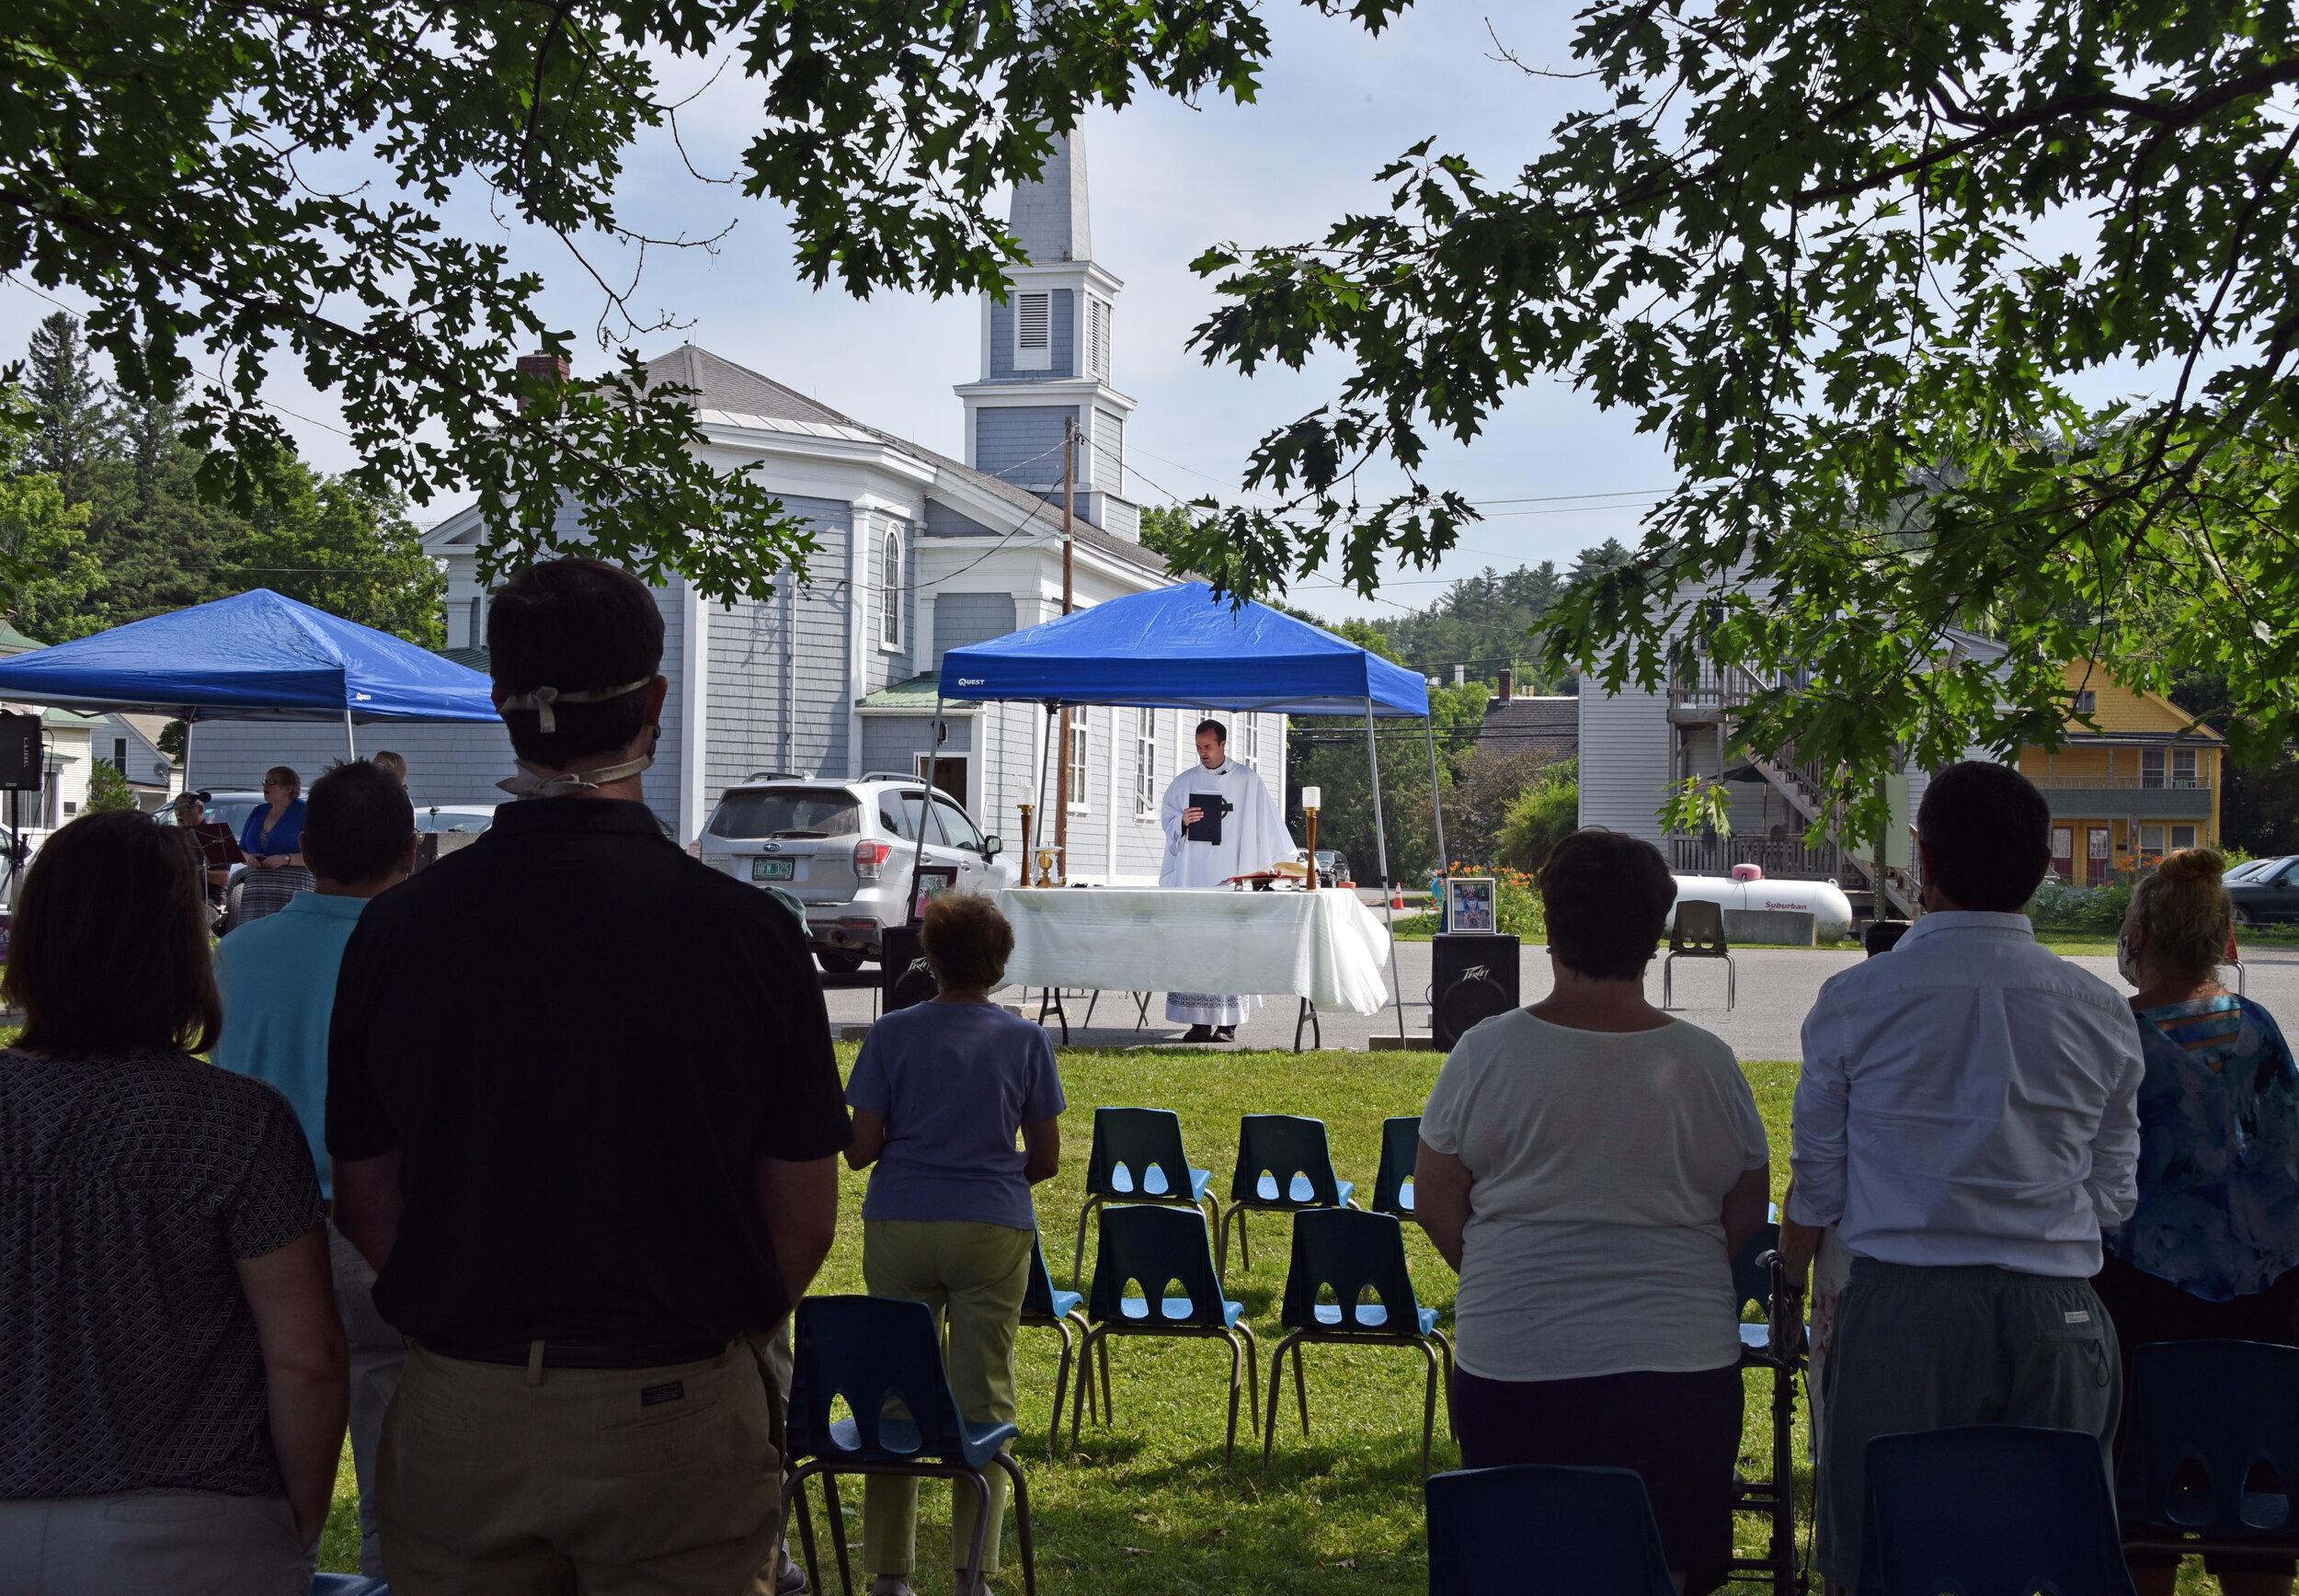   On Tuesday July 7, a memorial mass was held outdoors at St. Andrew's Catholic Church in honor of George Chilafoux who died June 19. Photo by Gordon Miller.  